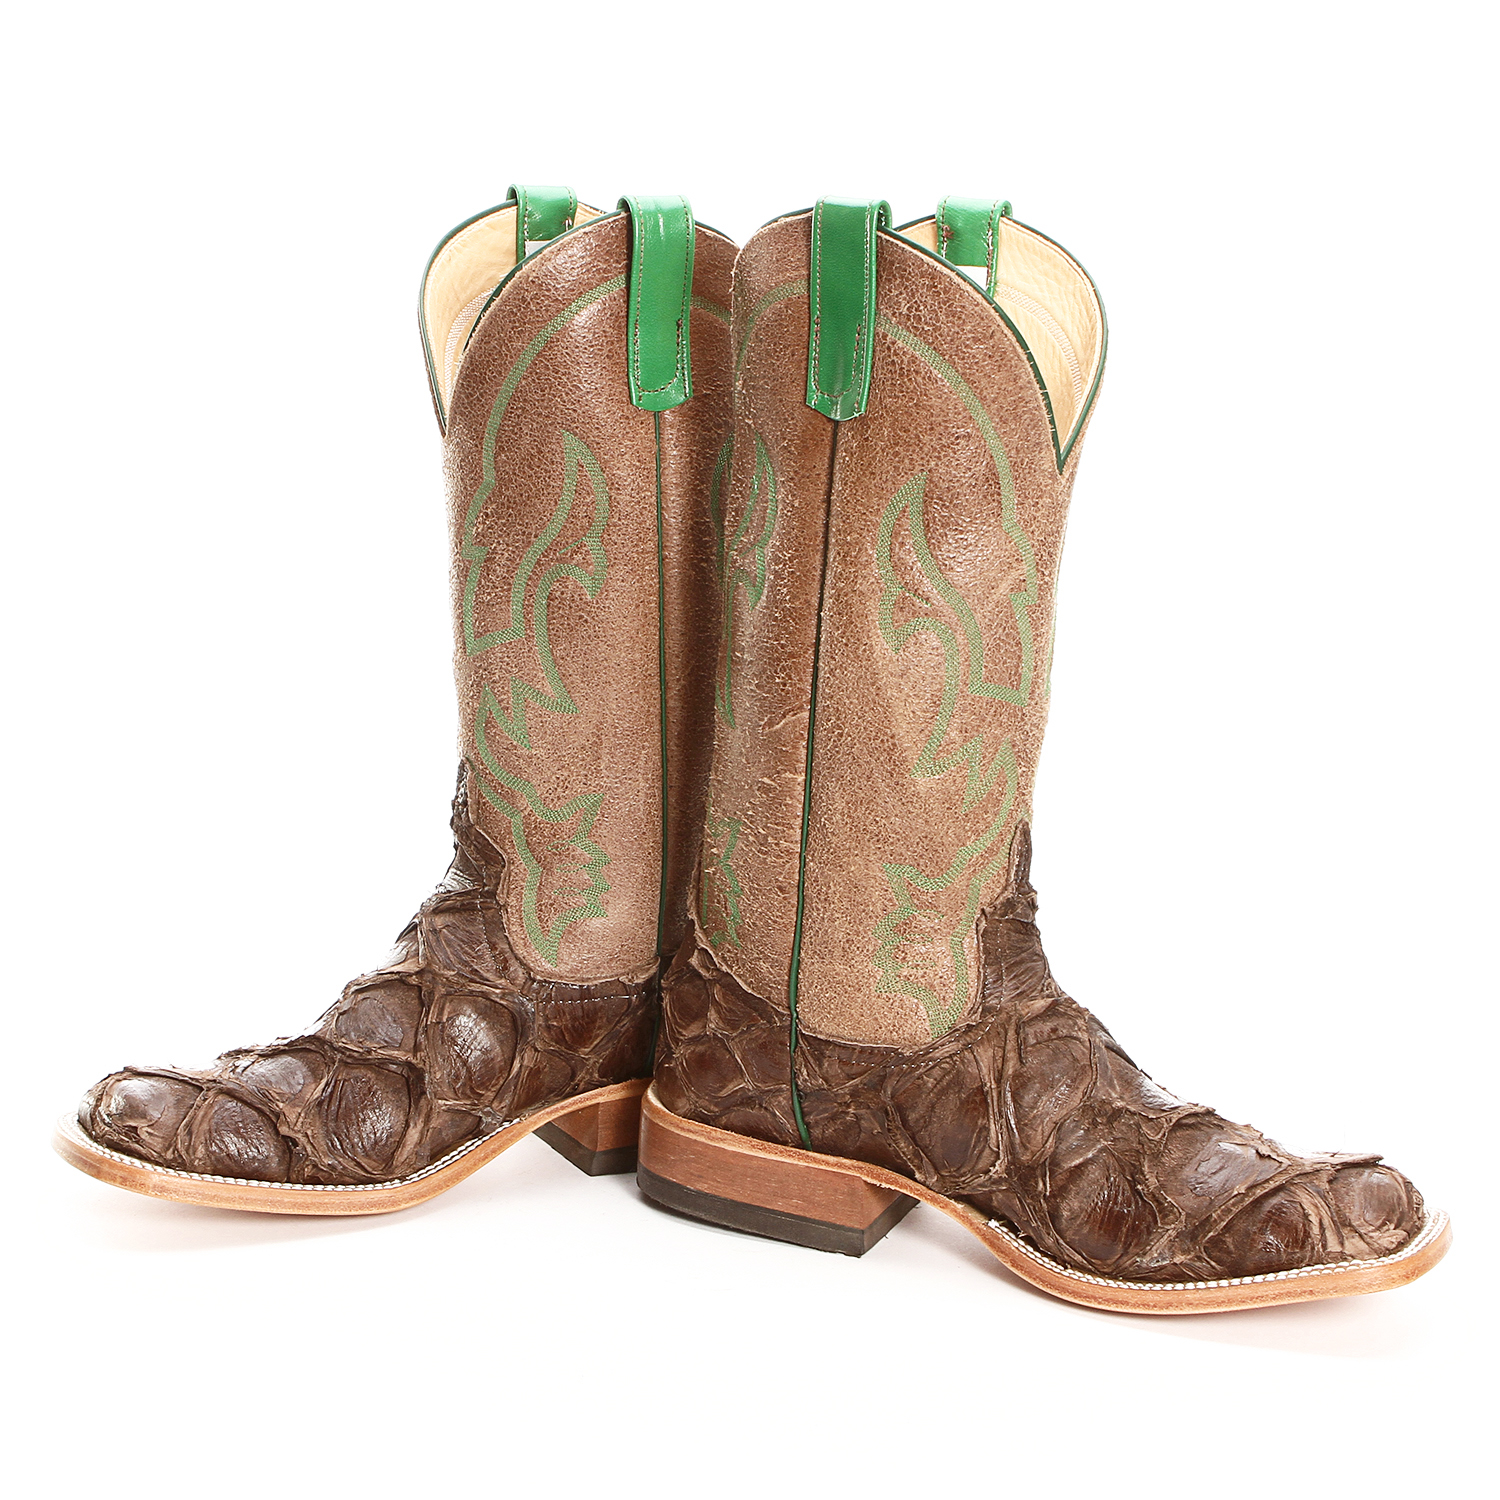 bass boots bootdaddy collection with anderson bean brown big bass cowboy boots EVAXIBW